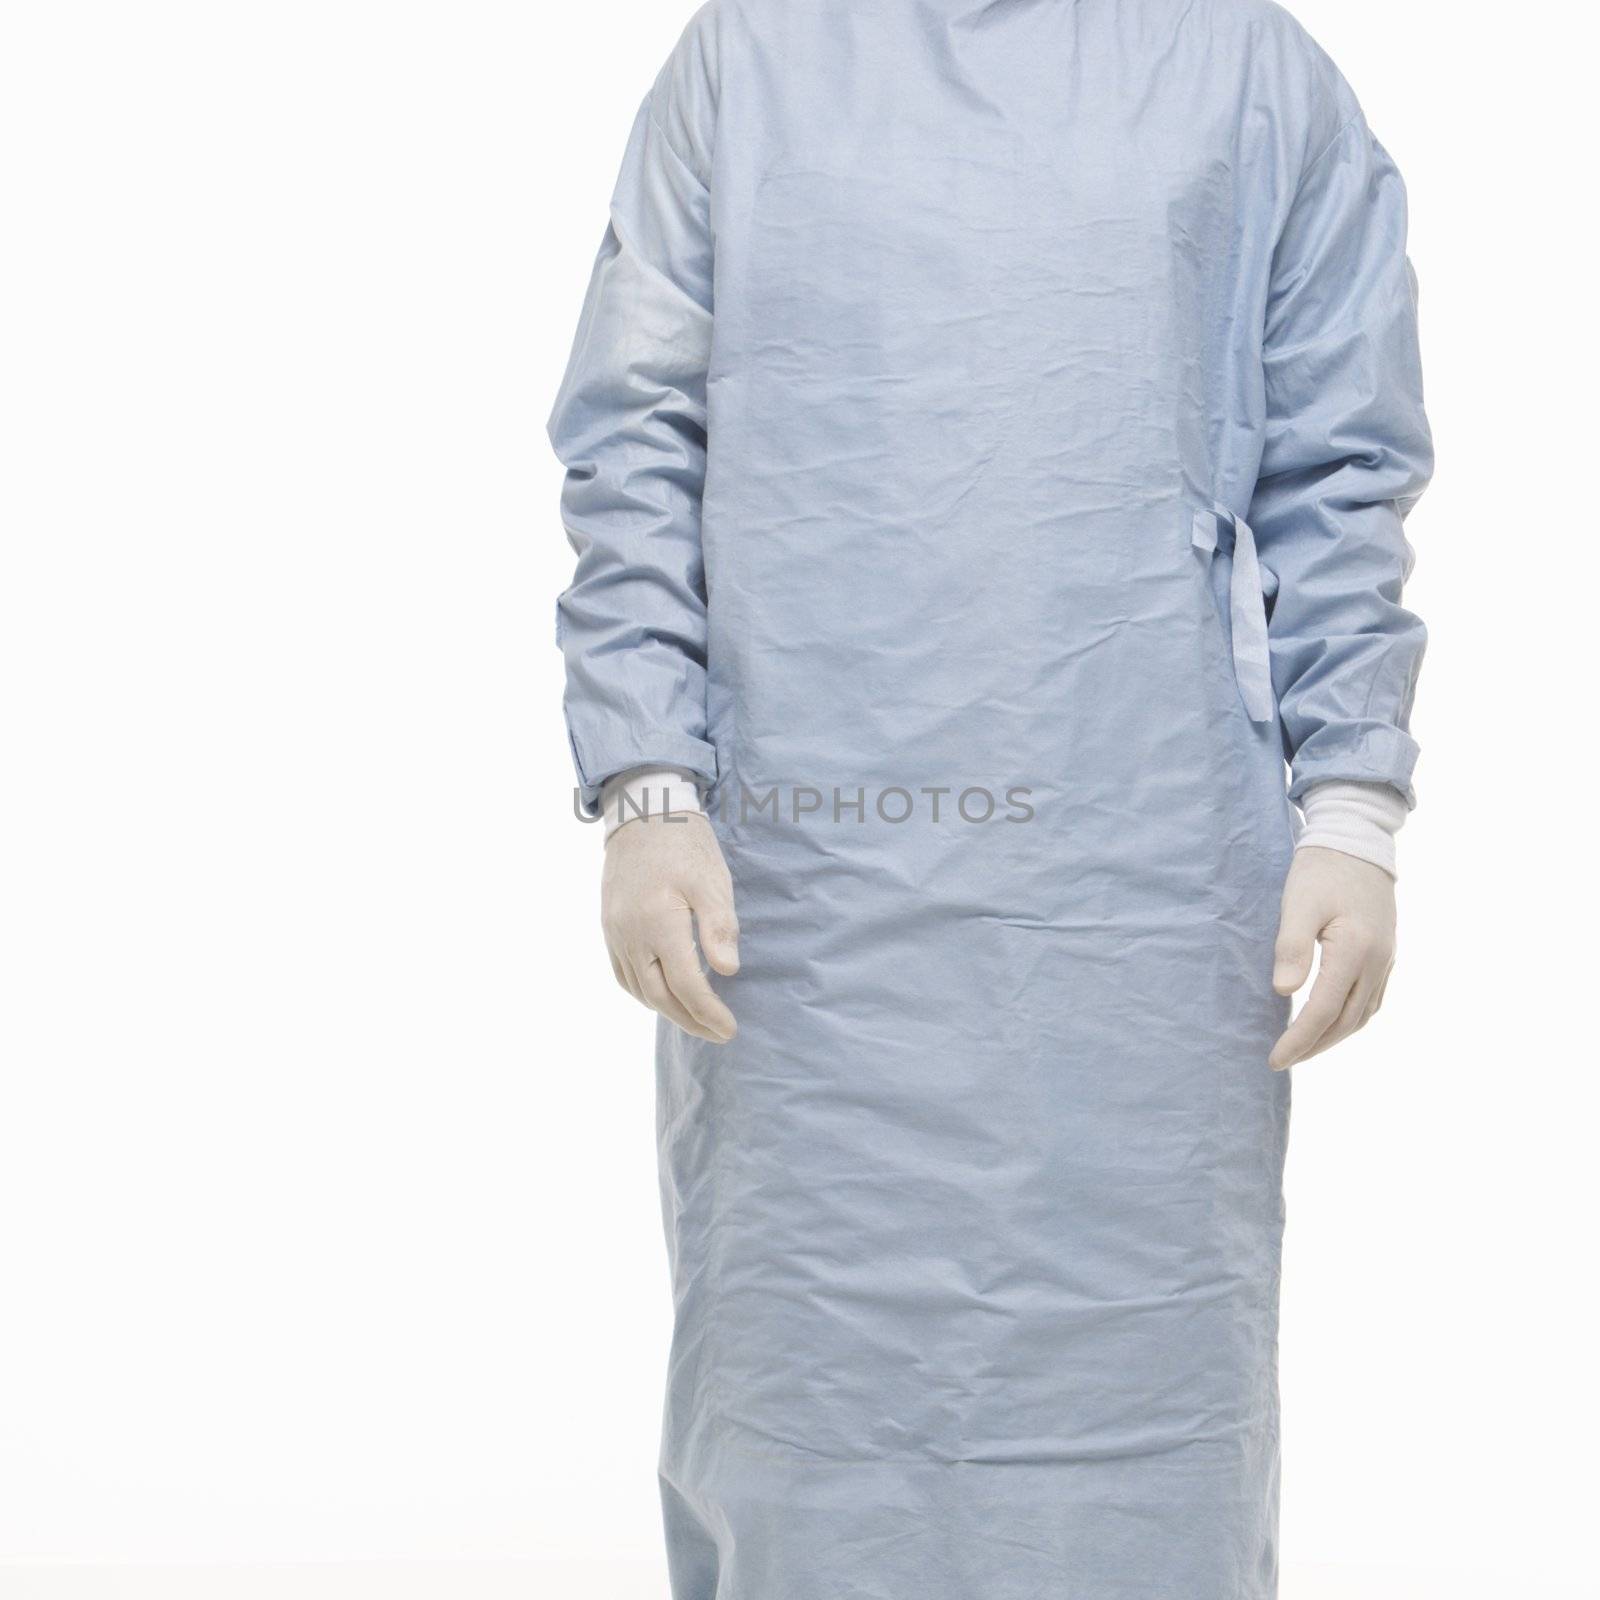 Mid-adult Caucasian male wearing scrubs and medical latex gloves.